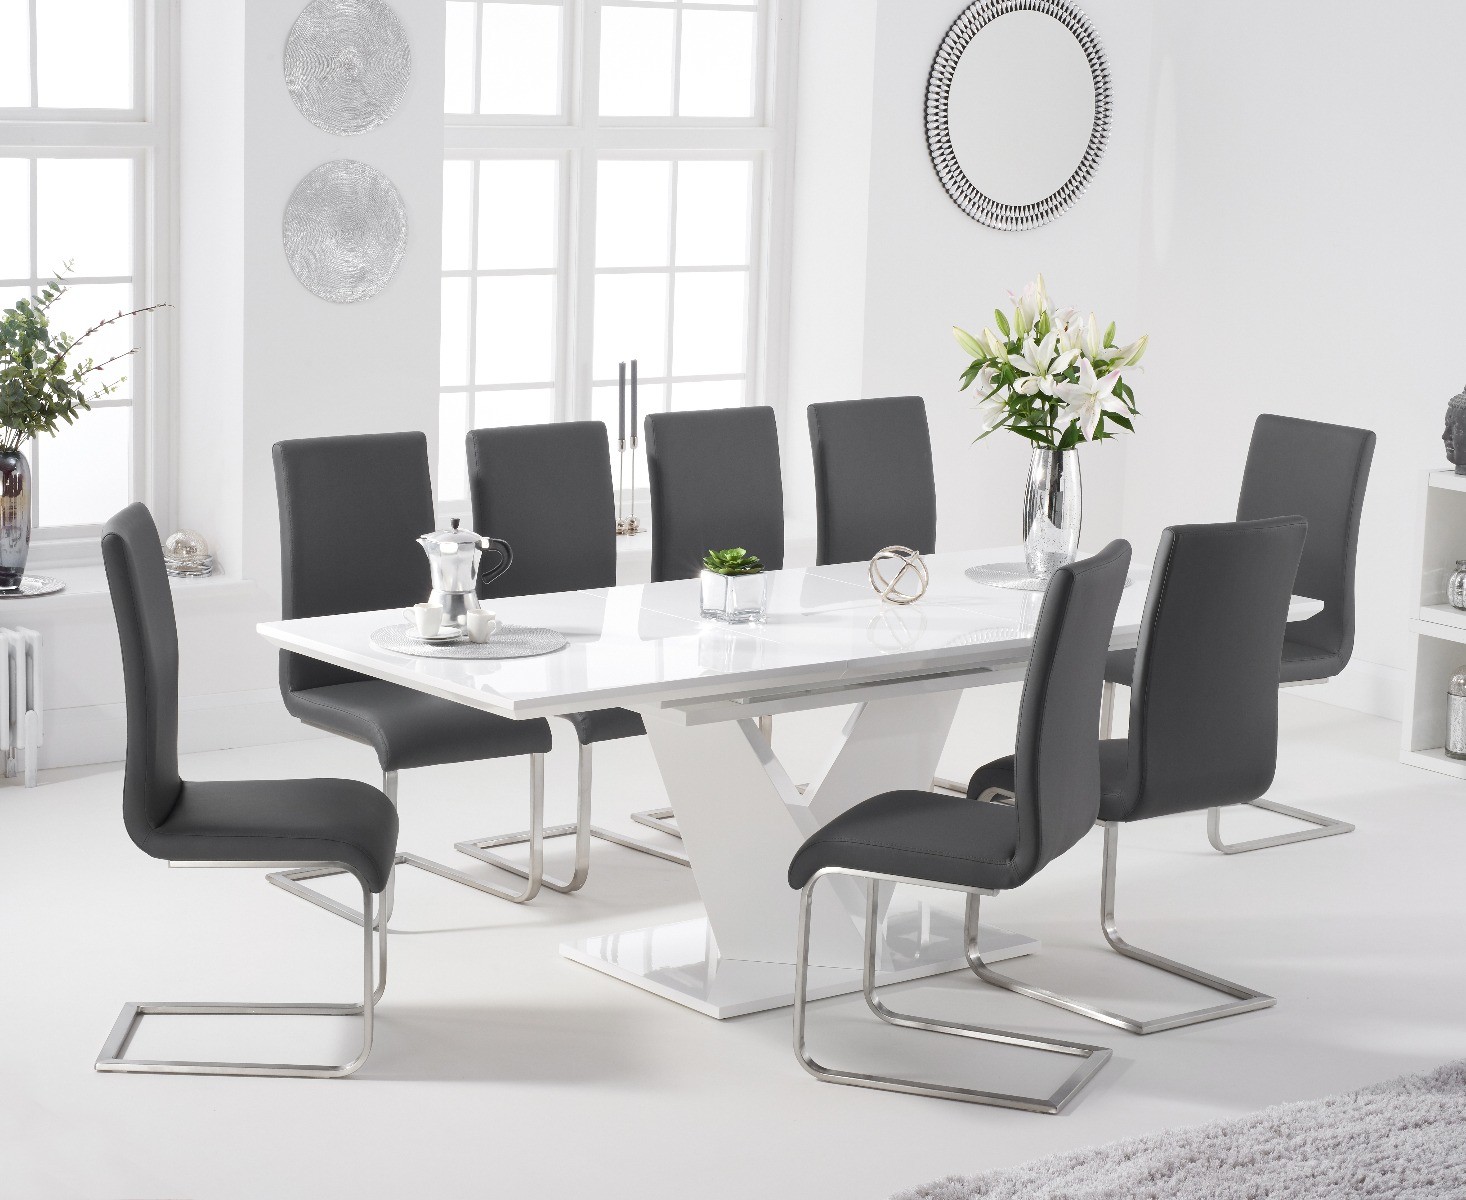 Vittorio 160cm White High Gloss Extending Dining Table With 6 Black Austin Faux Leather Chairs